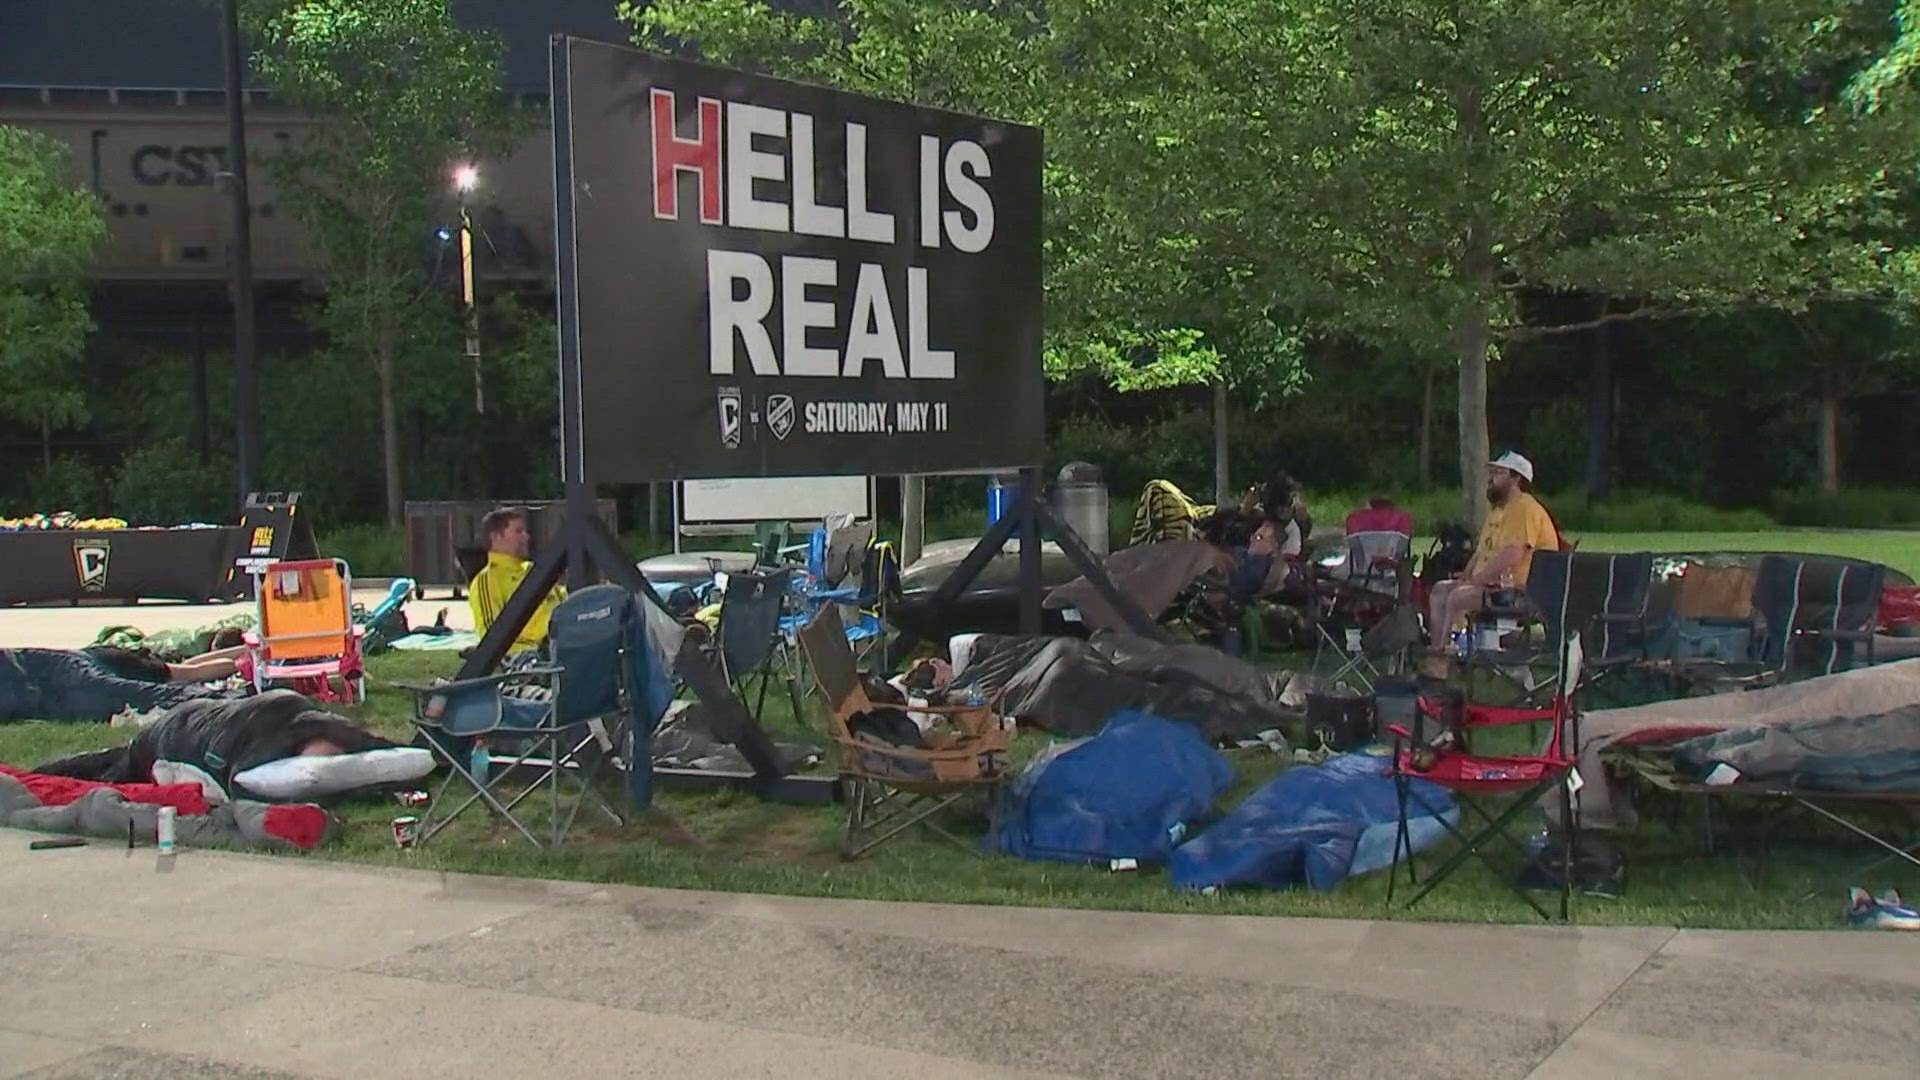 Hundreds of fans are camping out at Lower.com Field to compete for several prizes.